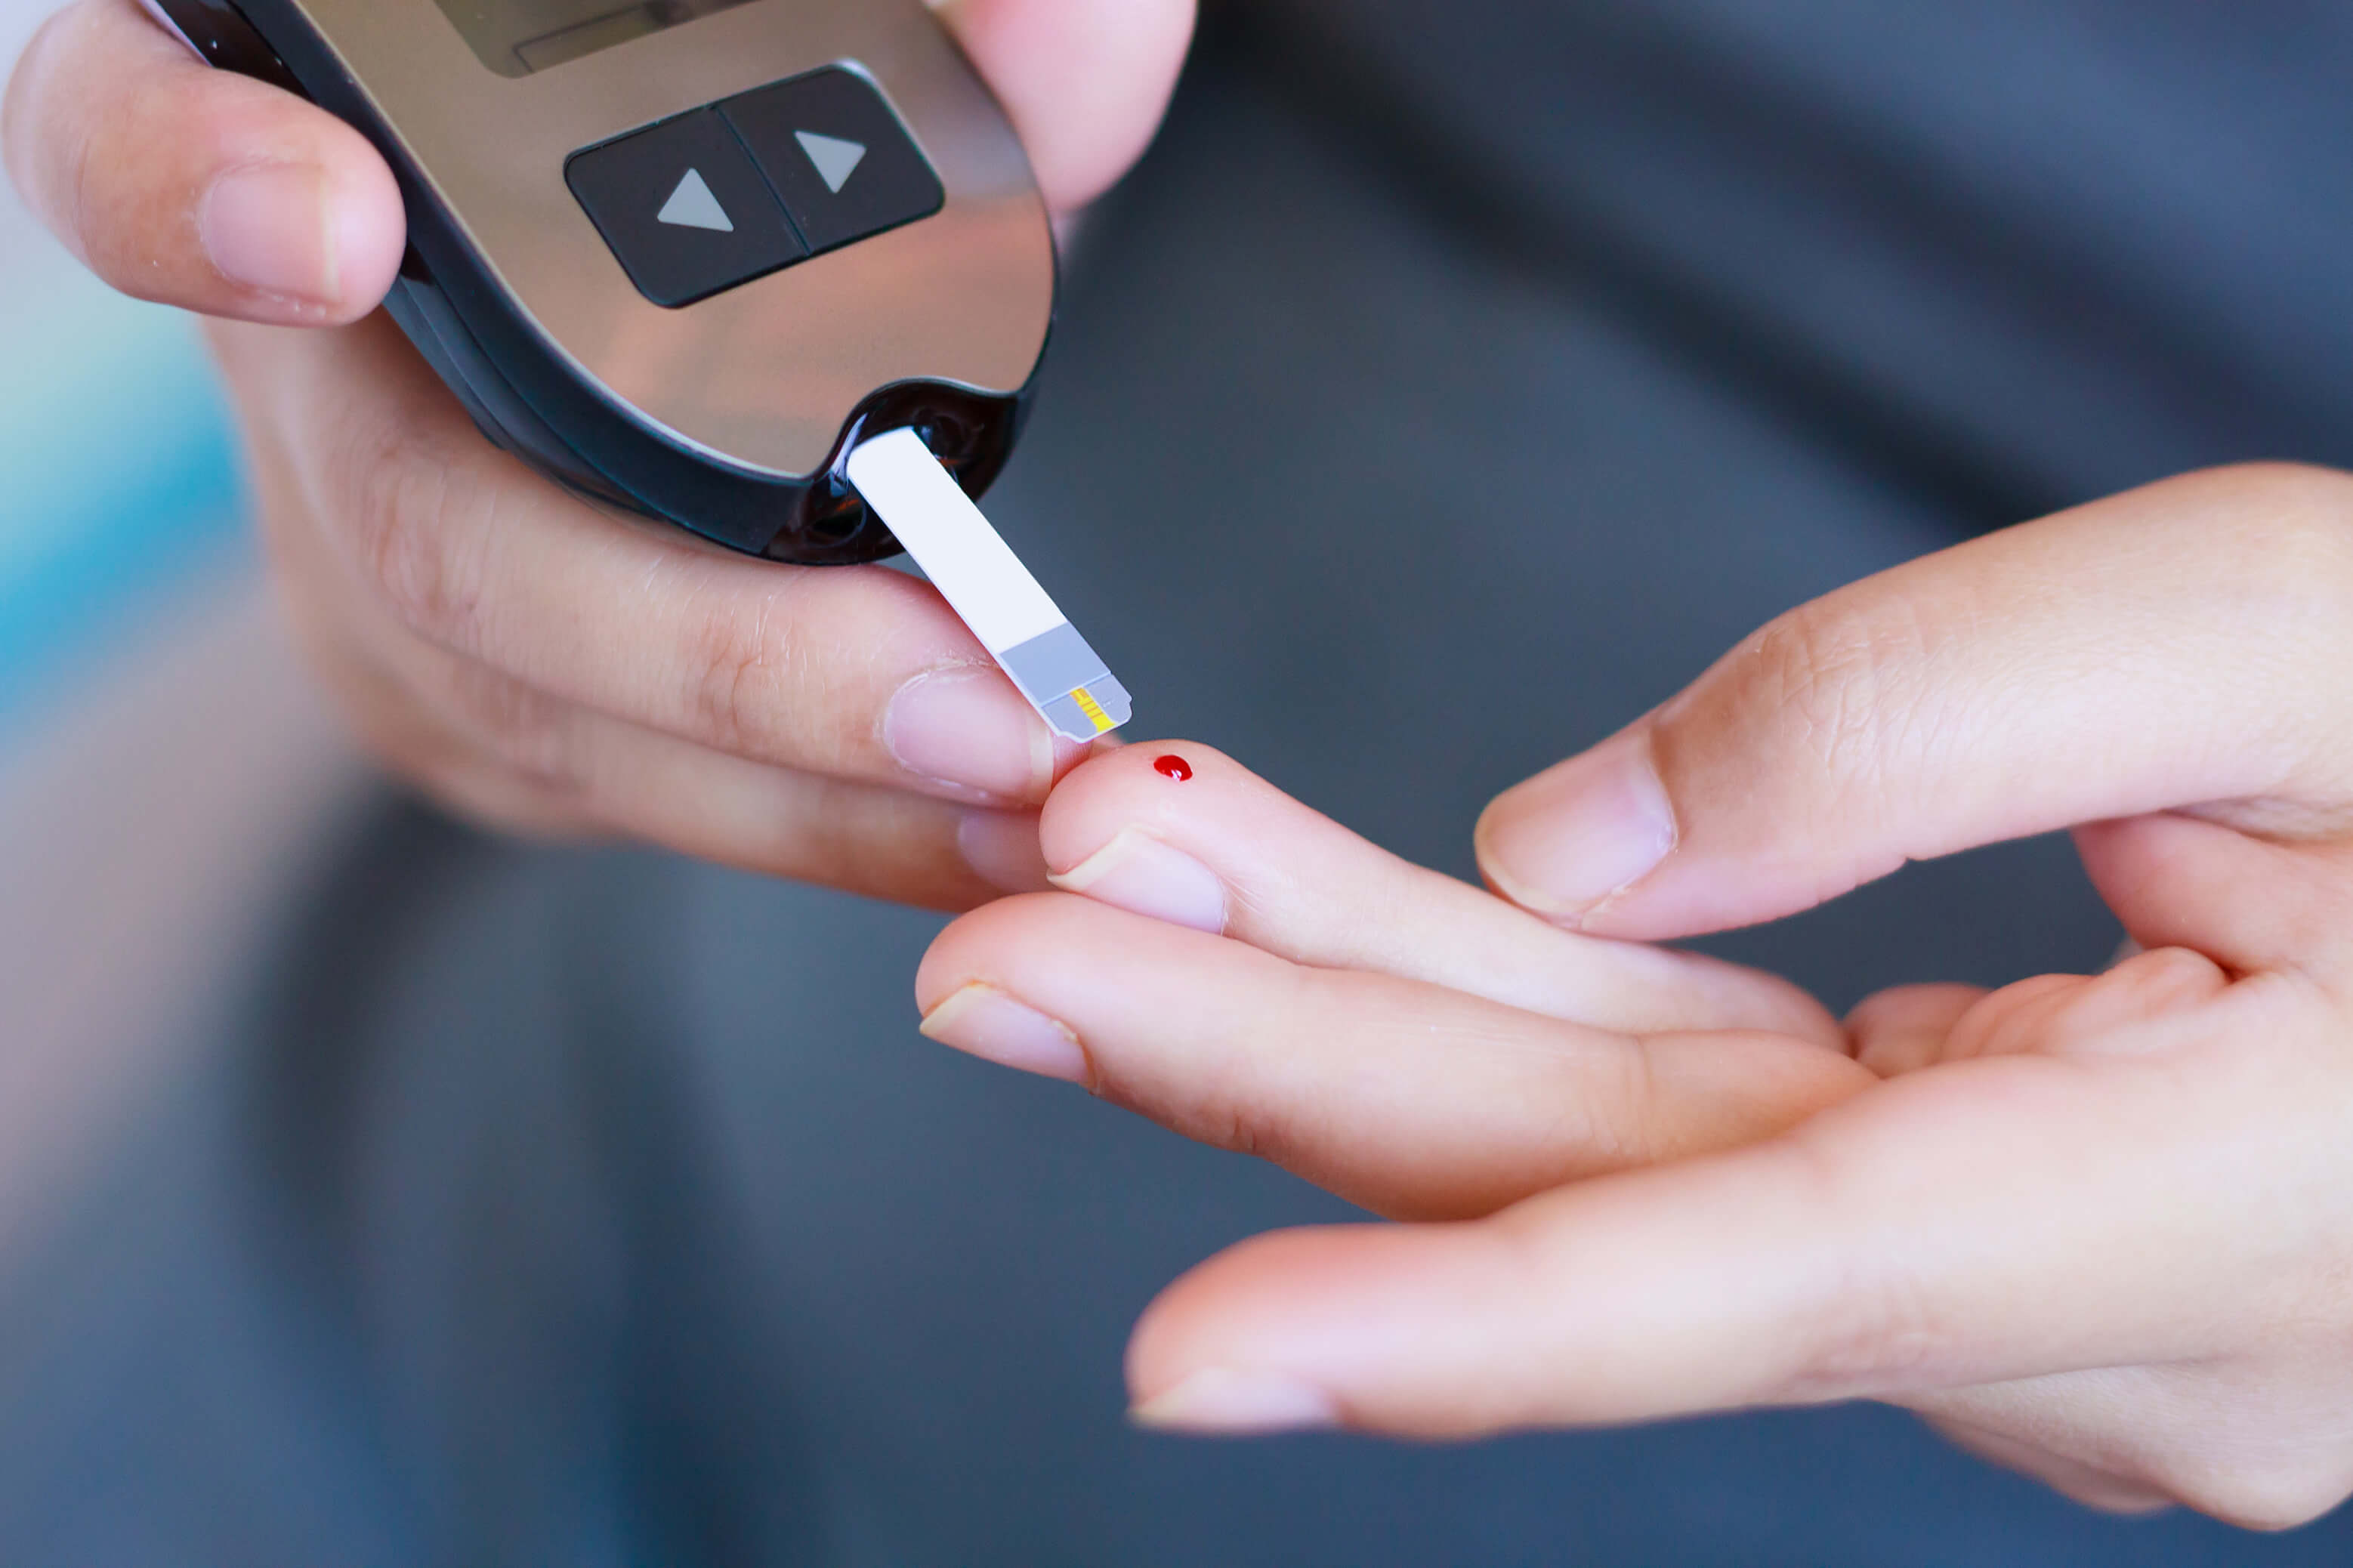 Signs of Low Blood Sugar and How to Treat It